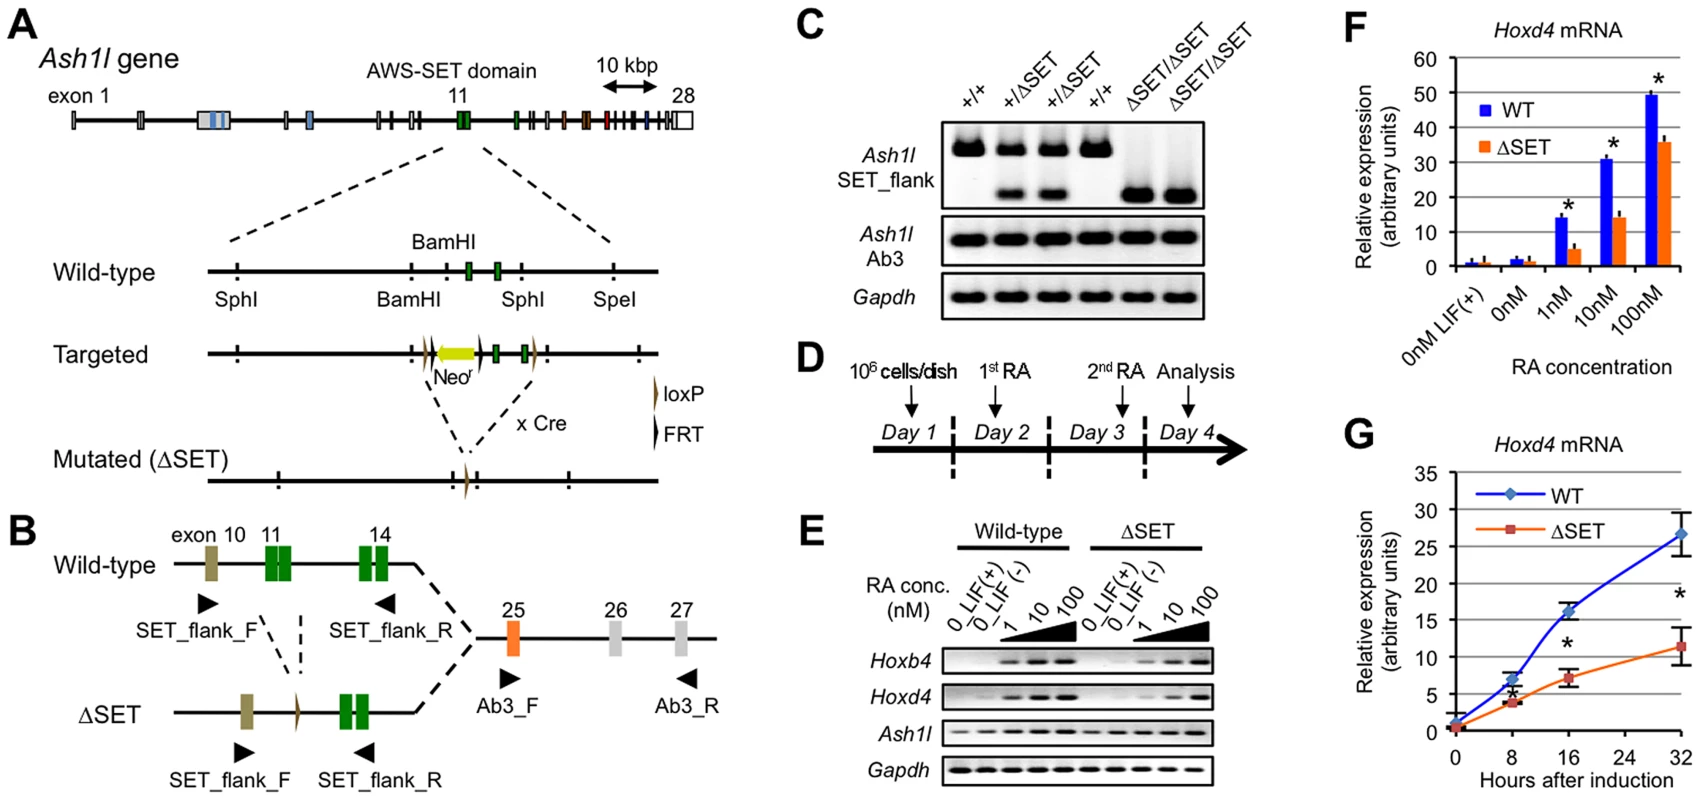 Basic characterization of Ash1l mutant ES cells and Hox gene expression in response to RA.